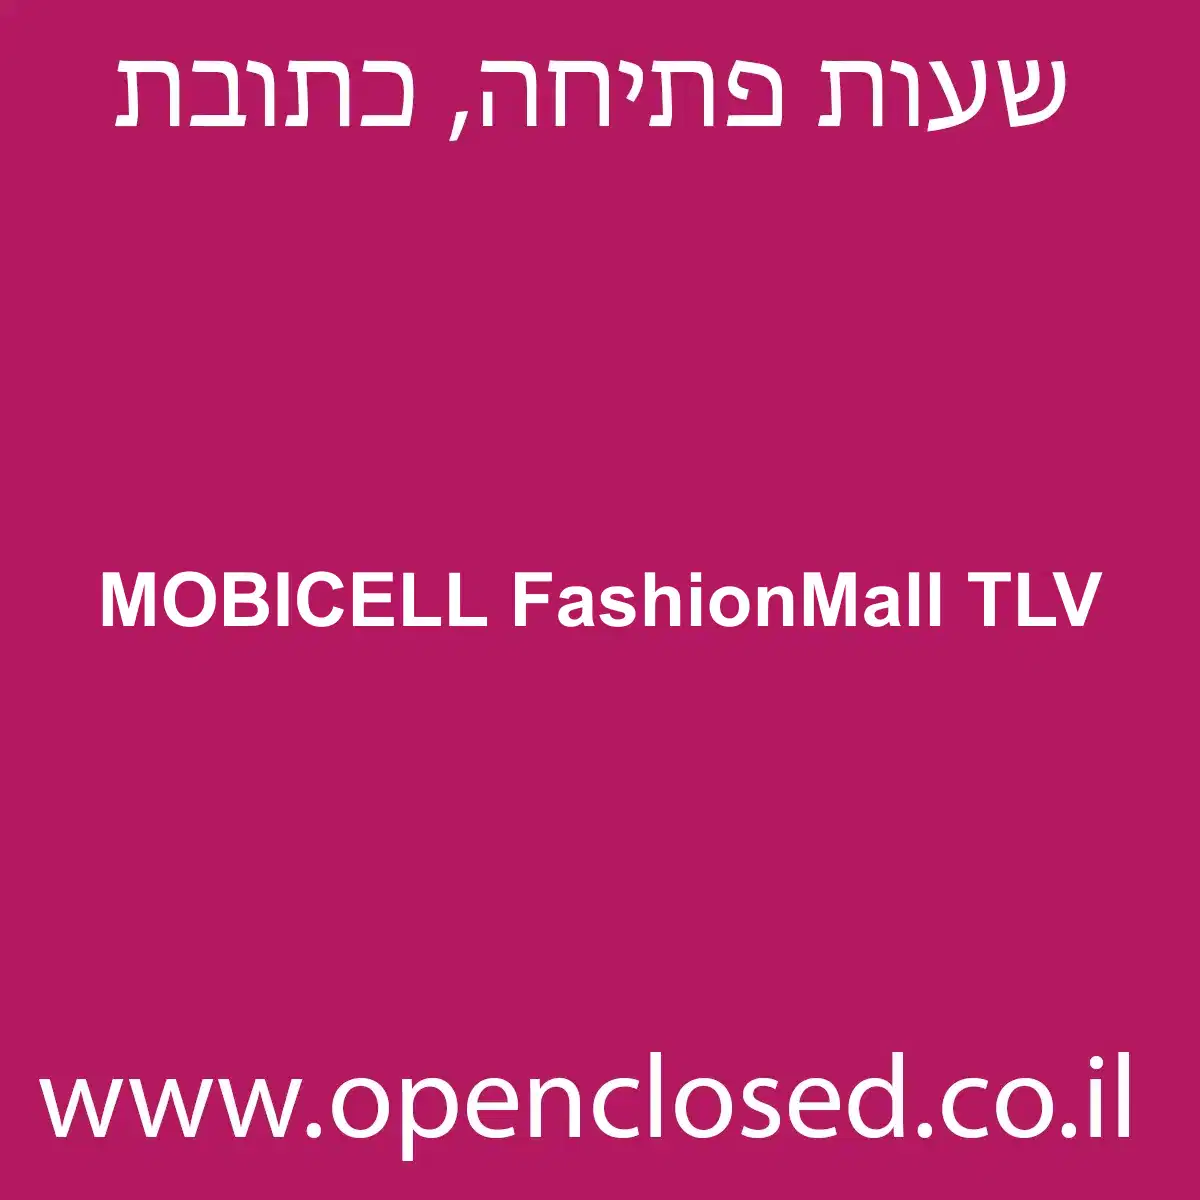 MOBICELL FashionMall TLV